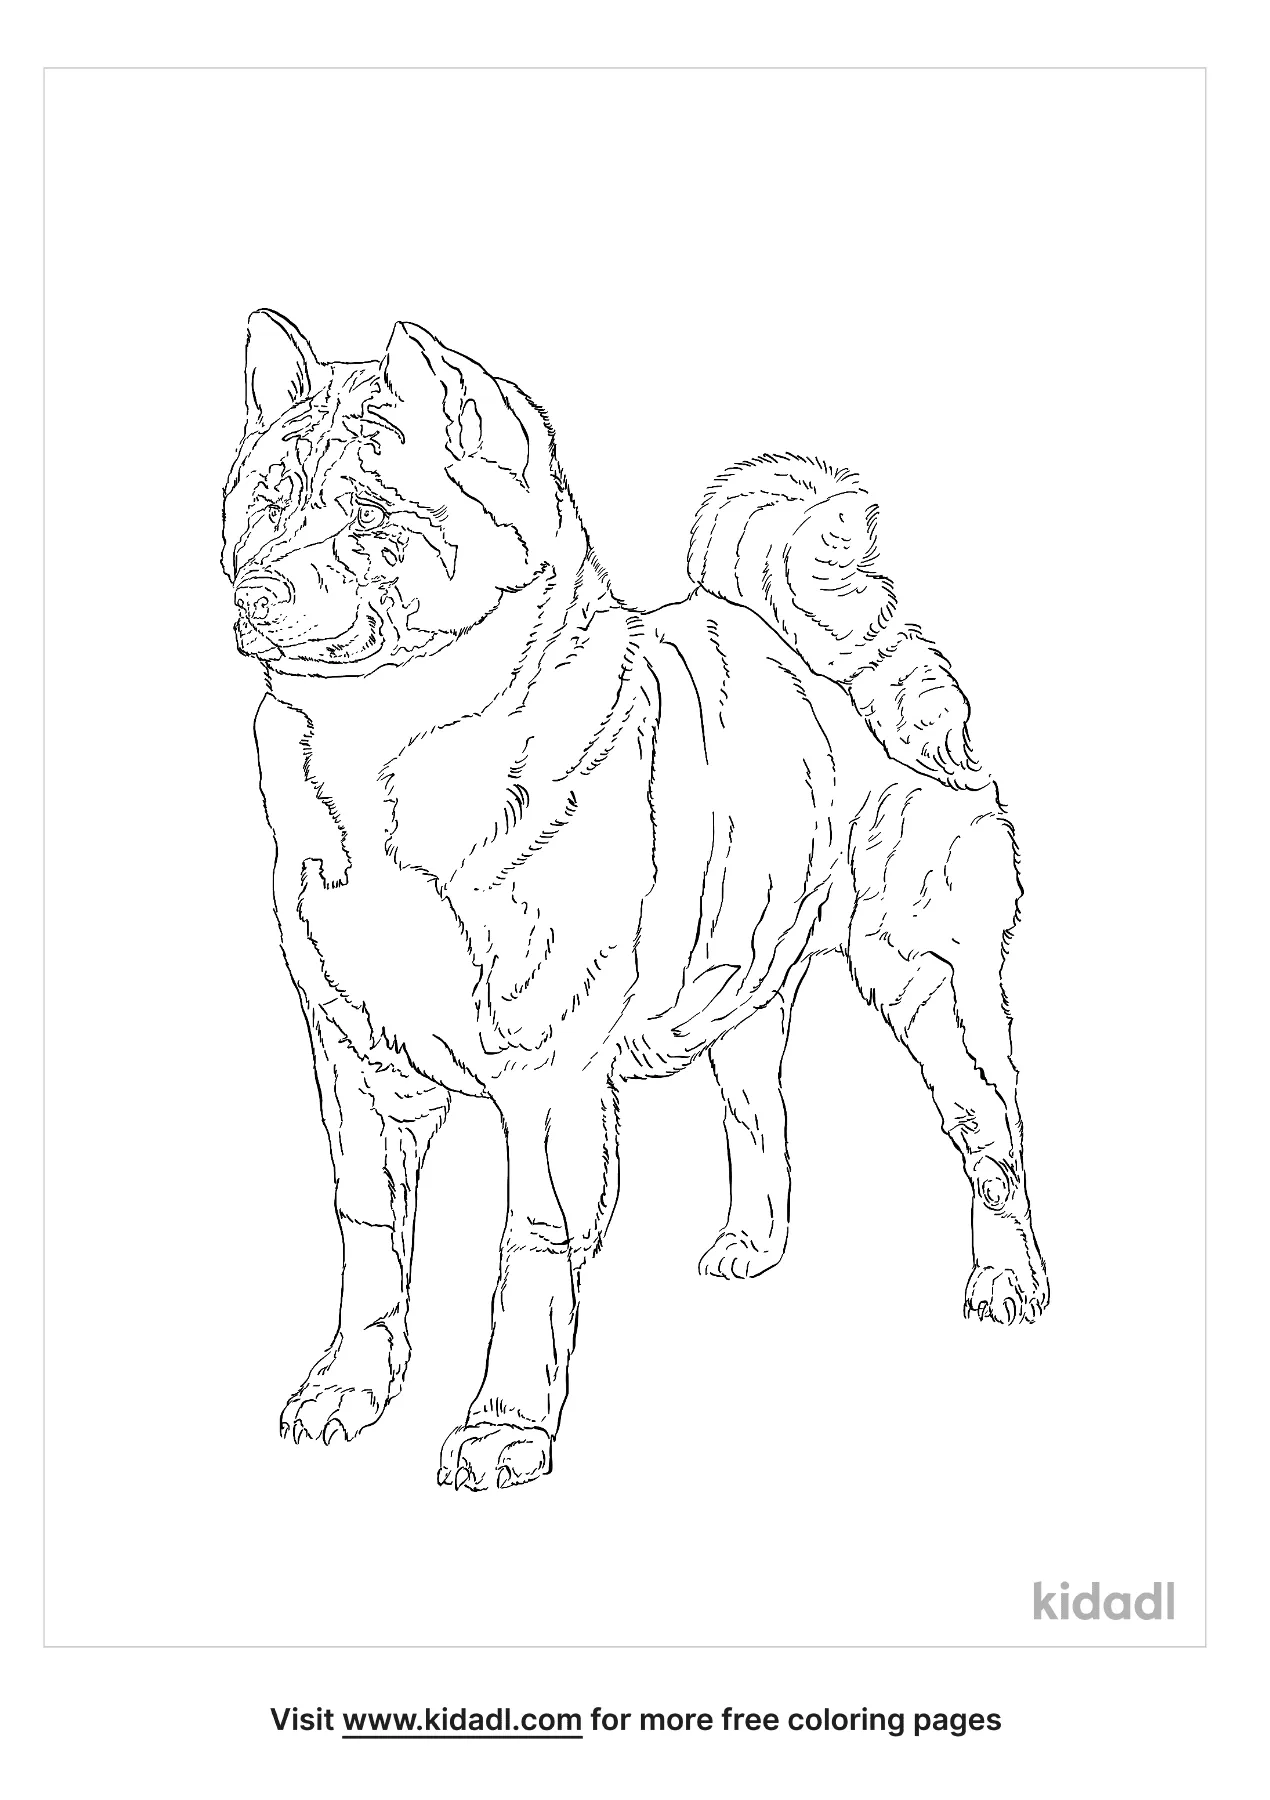 Akita Coloring Page   Free Dogs Coloring Page   Kidadl